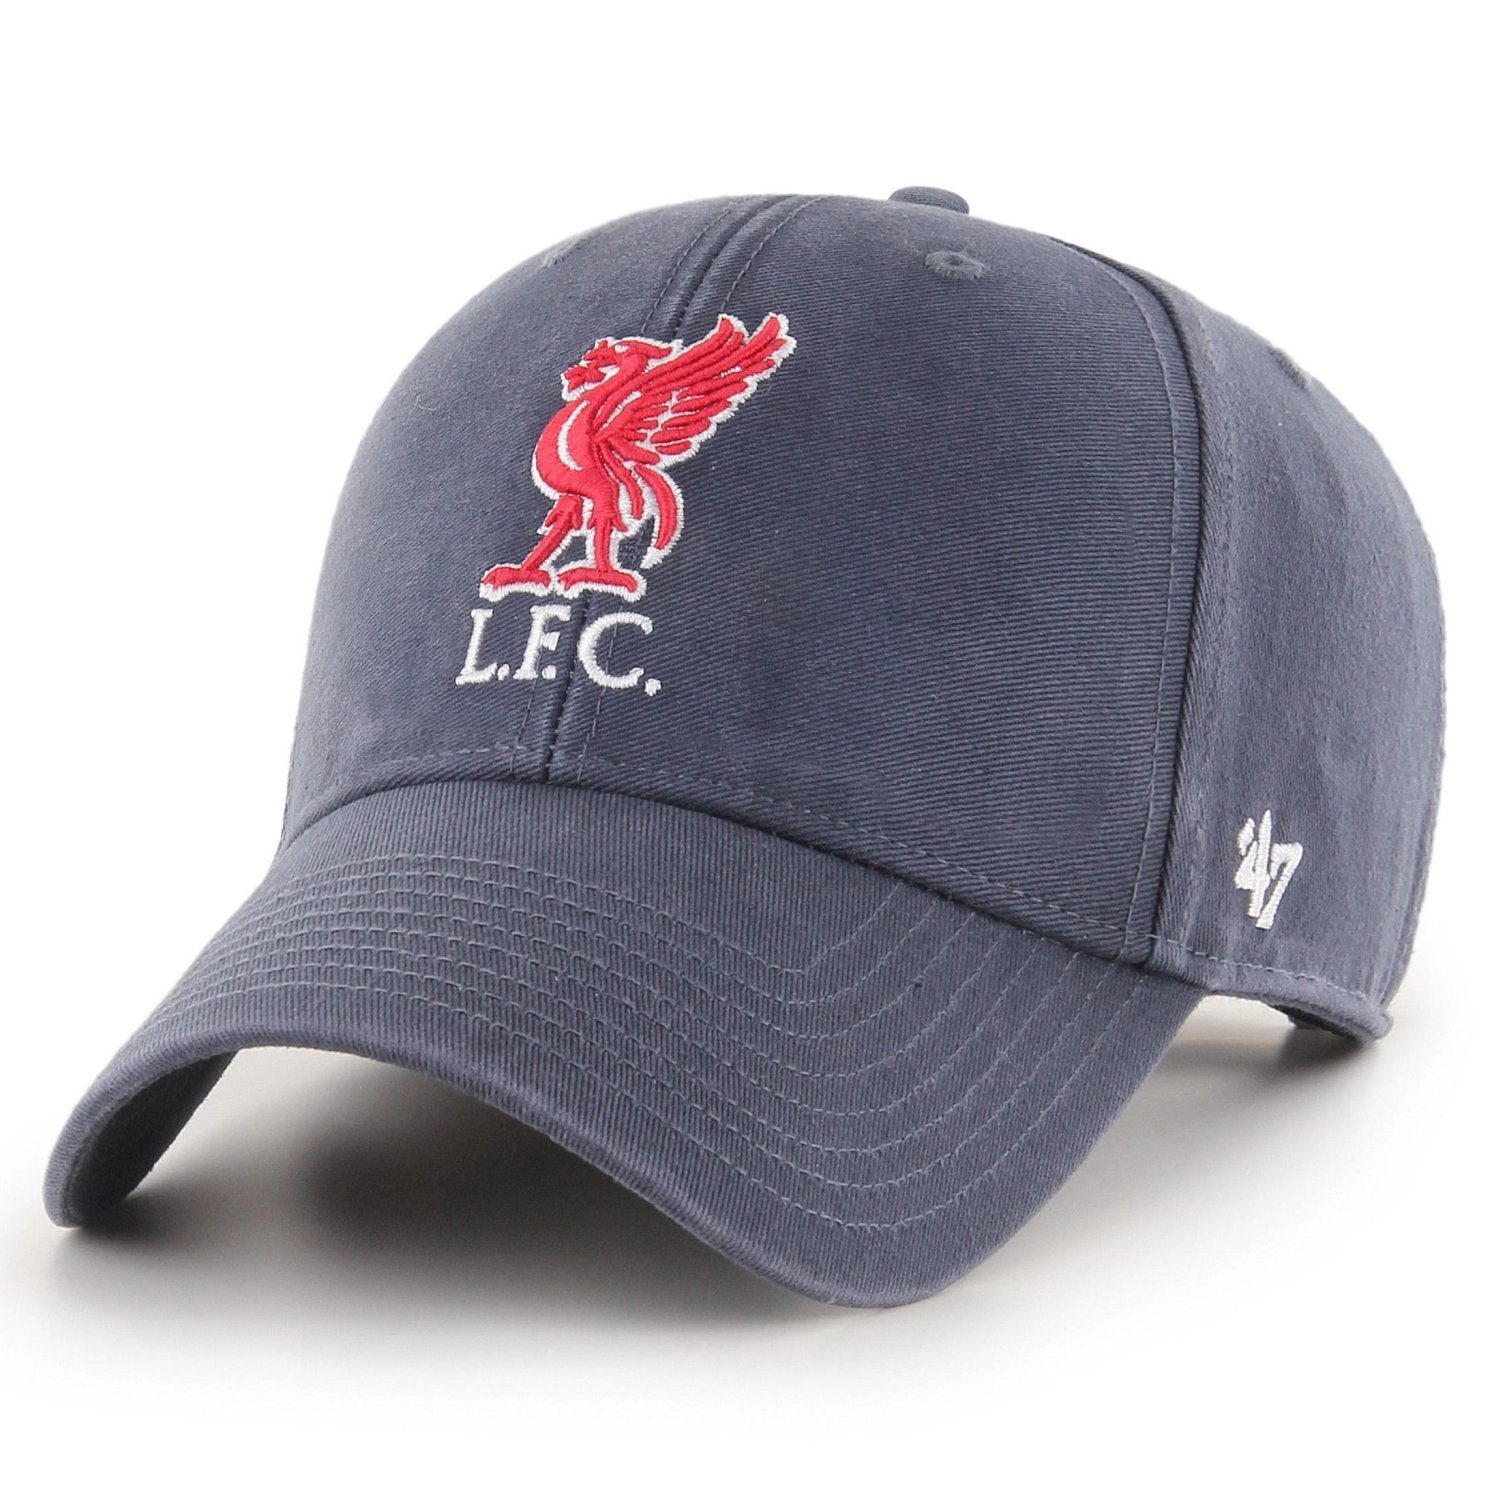 '47 Brand Baseball Cap Relaxed Fit LEGEND FC Liverpool